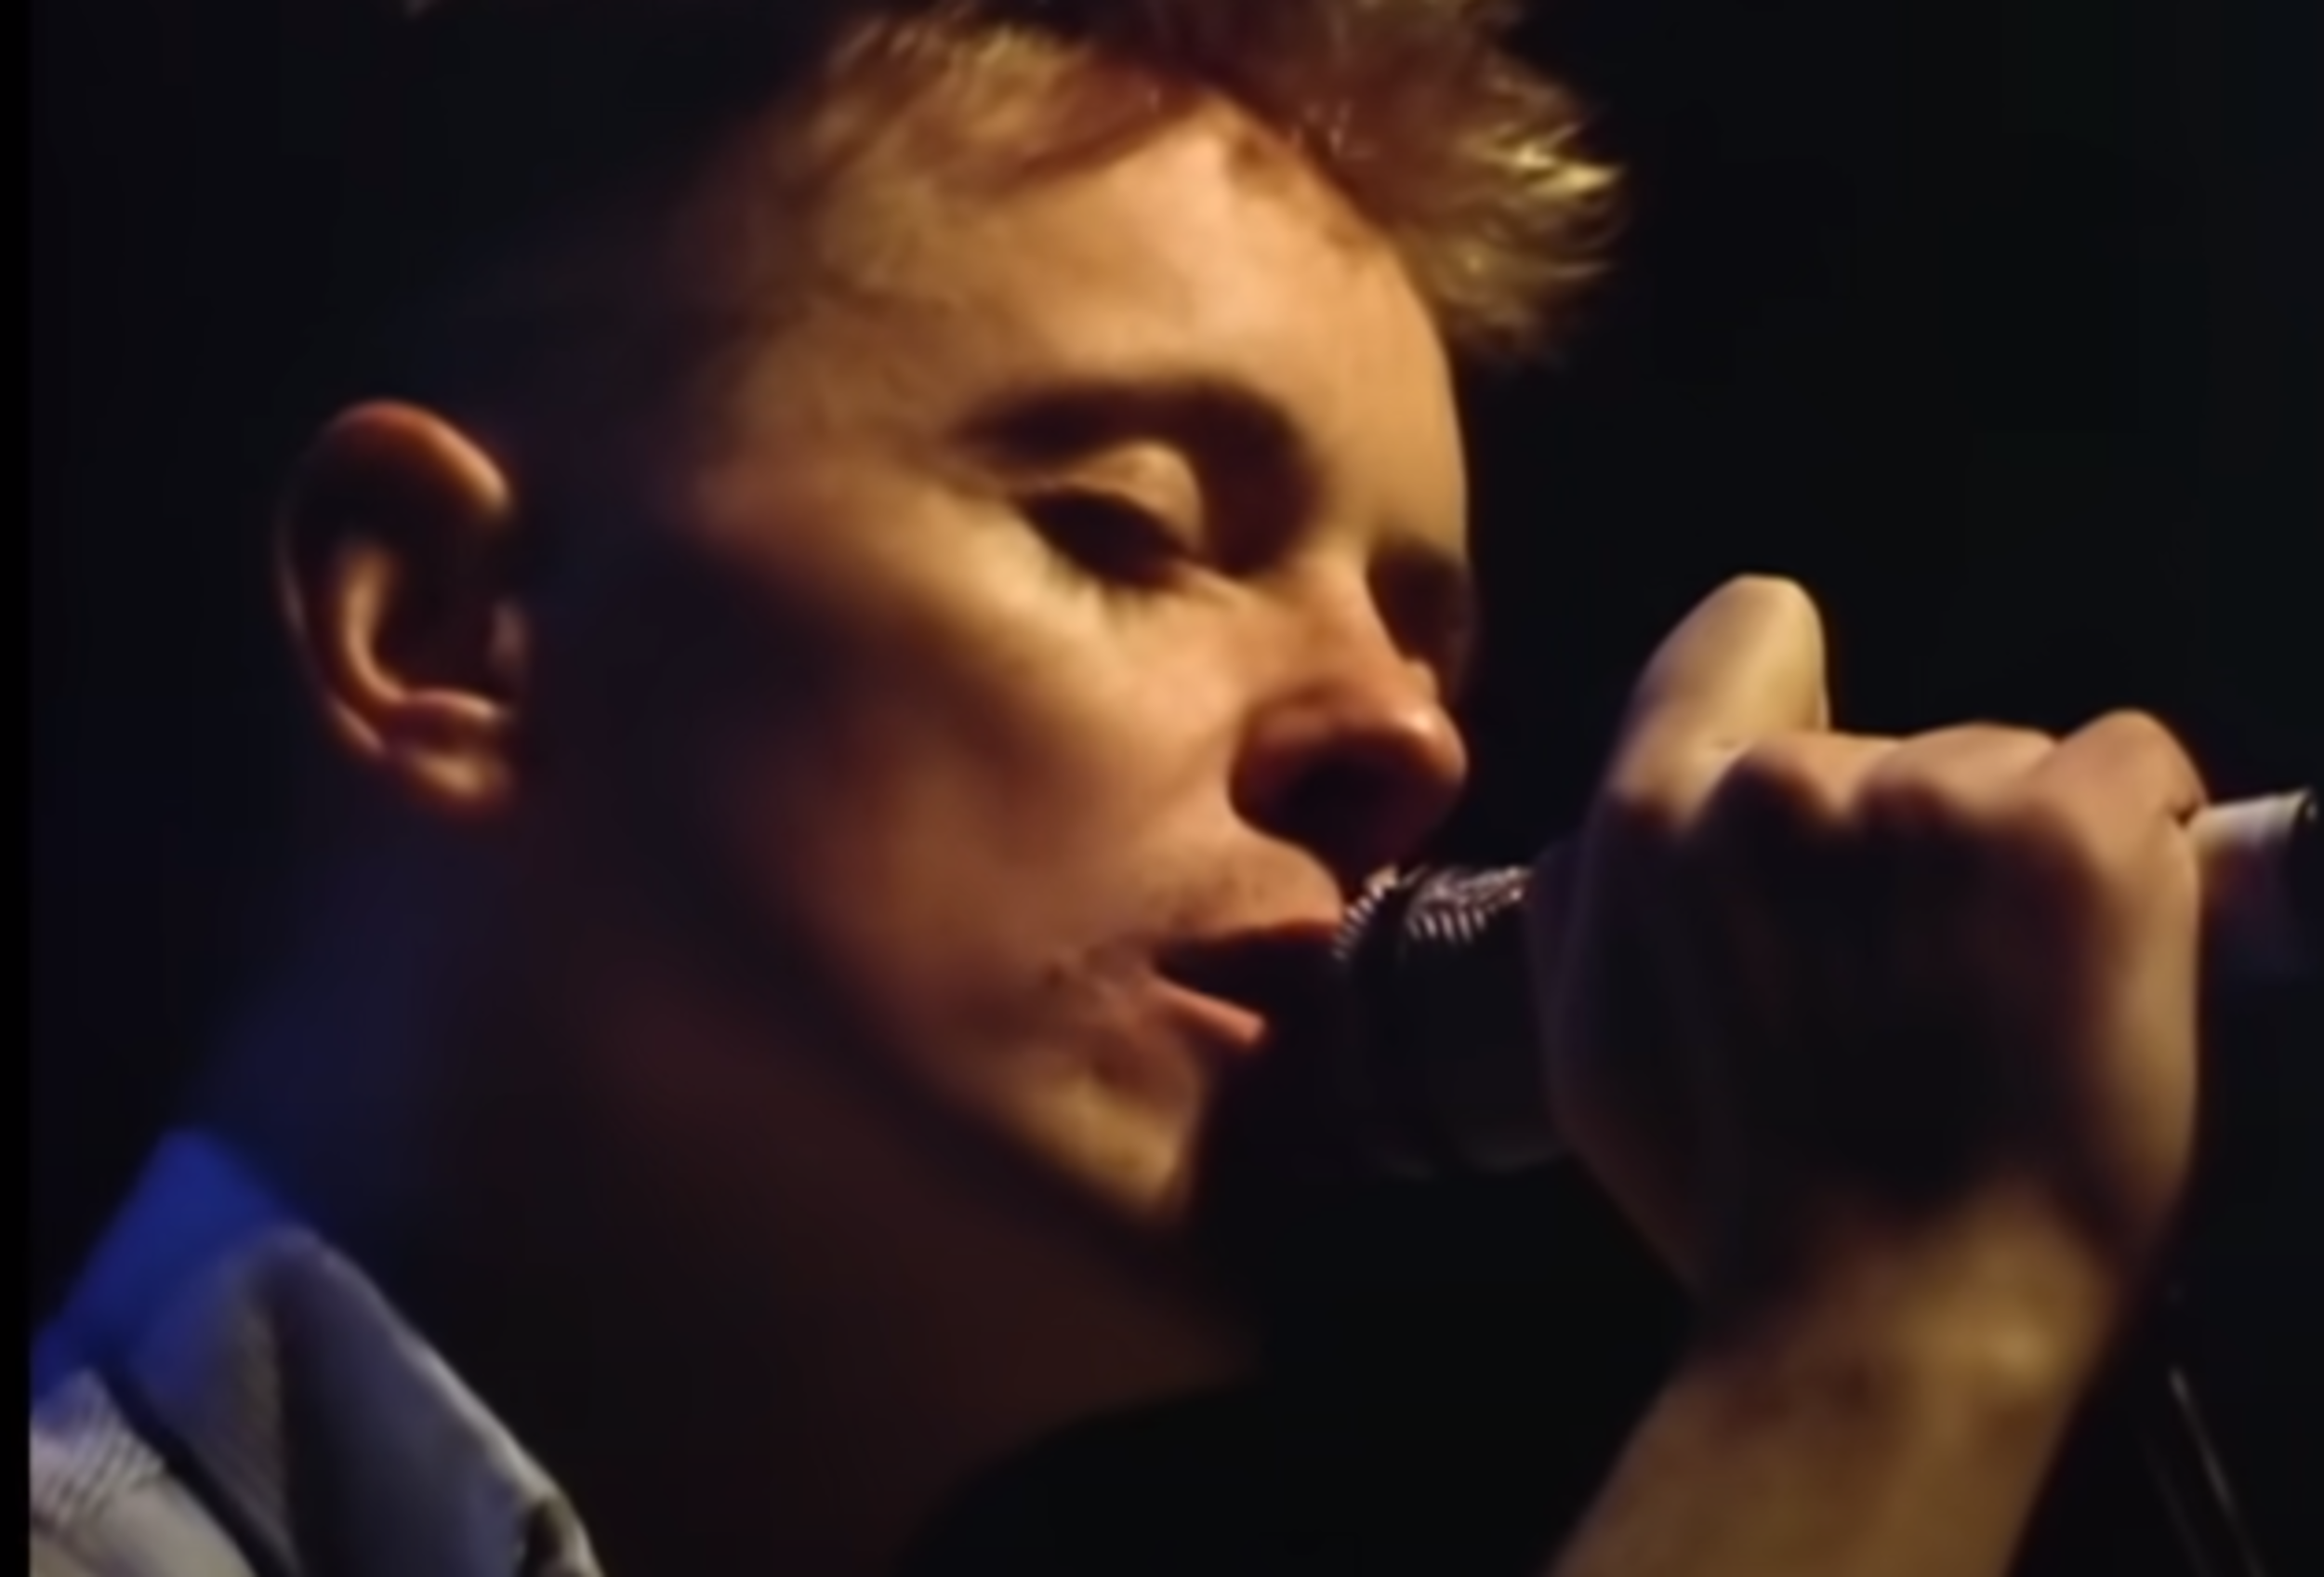 <p>Sadly, in the case of New Order, it was the 1980 death of Ian Curtis, frontman of post-punk stars Joy Division, that caused surviving members Bernard Sumner, Peter Hook, and Stephen Morris to move on. Adding keyboardist Gillian Gilbert, New Order still harbored the <a href="https://www.youtube.com/watch?v=zuuObGsB0No">post-punk tendencies of Joy Division</a> but fused with <a href="https://www.youtube.com/watch?v=tkOr12AQpnU">synth-pop</a><span> and </span><a href="https://www.youtube.com/watch?v=FYH8DsU2WCk"><span>electronic dance</span></a><span> elements that made the group one of the first mainstream alternative acts.</span></p><p><a href='https://www.msn.com/en-us/community/channel/vid-cj9pqbr0vn9in2b6ddcd8sfgpfq6x6utp44fssrv6mc2gtybw0us'>Follow us on MSN to see more of our exclusive entertainment content.</a></p>